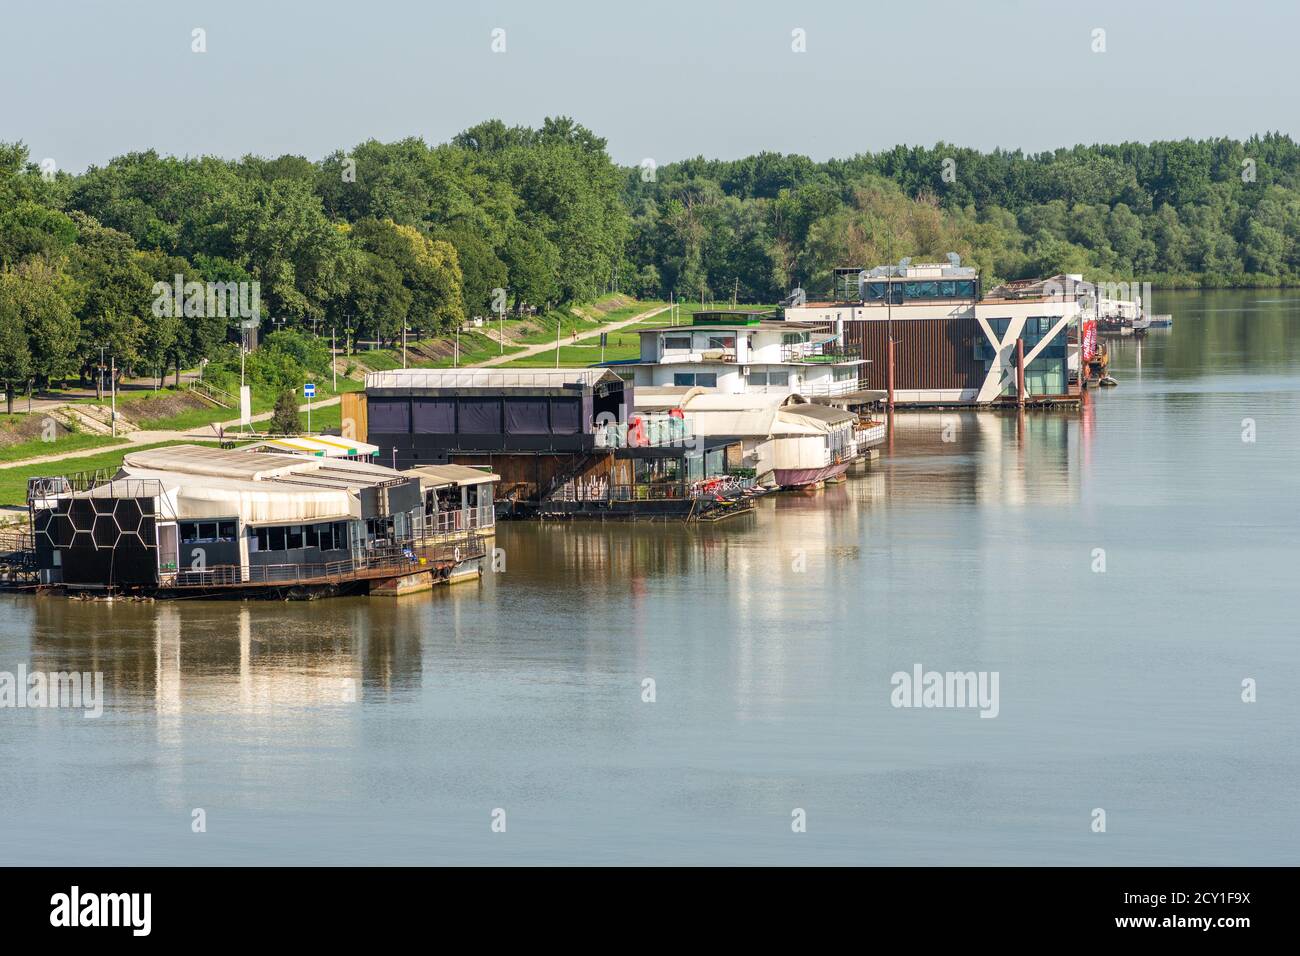 Belgrade / Serbia - June 22, 2019: River barges floating at the confluence of rivers Sava and Danube in Belgrade, Serbia. River barges (splav) are pop Stock Photo